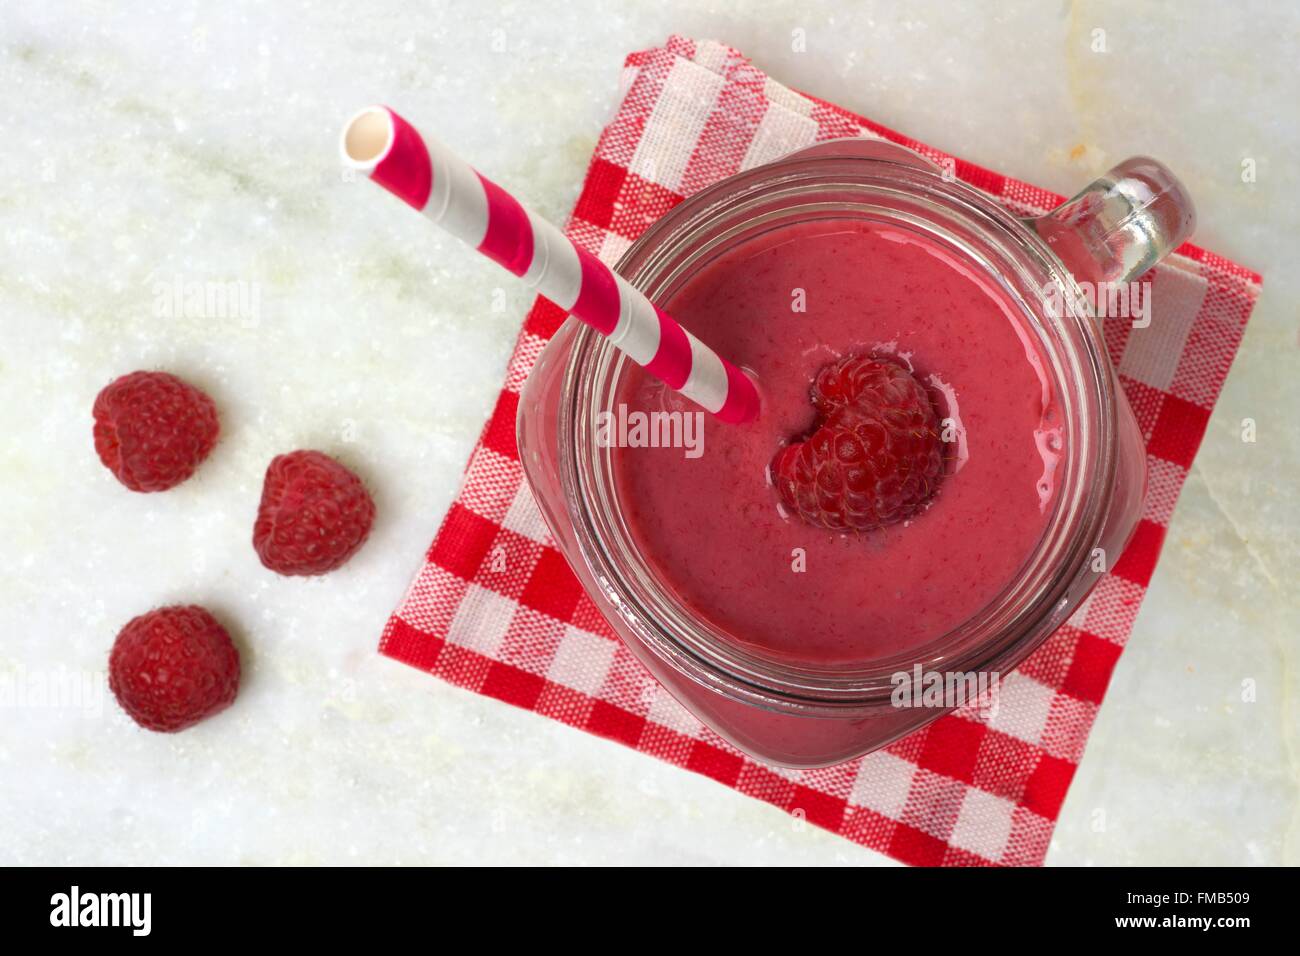 Pink raspberry smoothie in a mason jar with straw, overhead view with checked cloth on white marble background Stock Photo